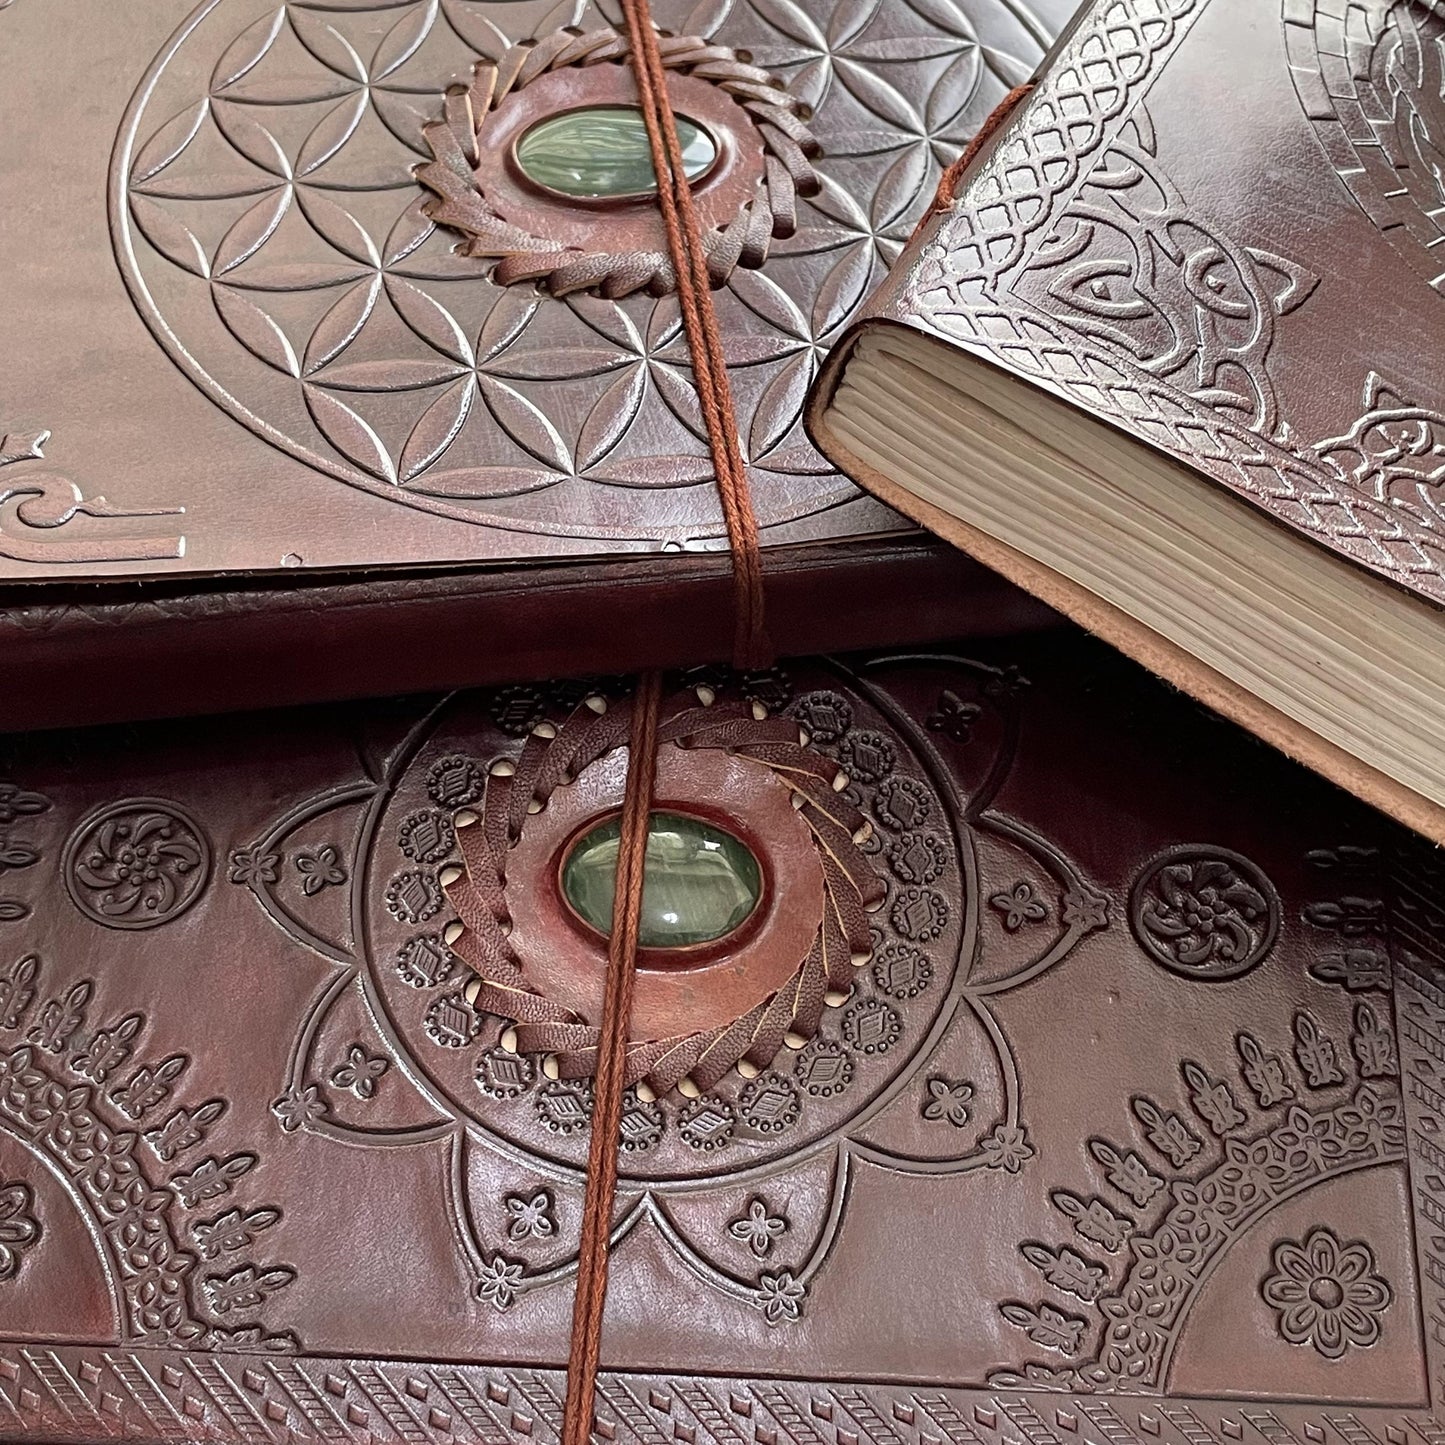 Embellished Leather Diary in a Compact 10x13 Inch Size" With Natural Gemstone